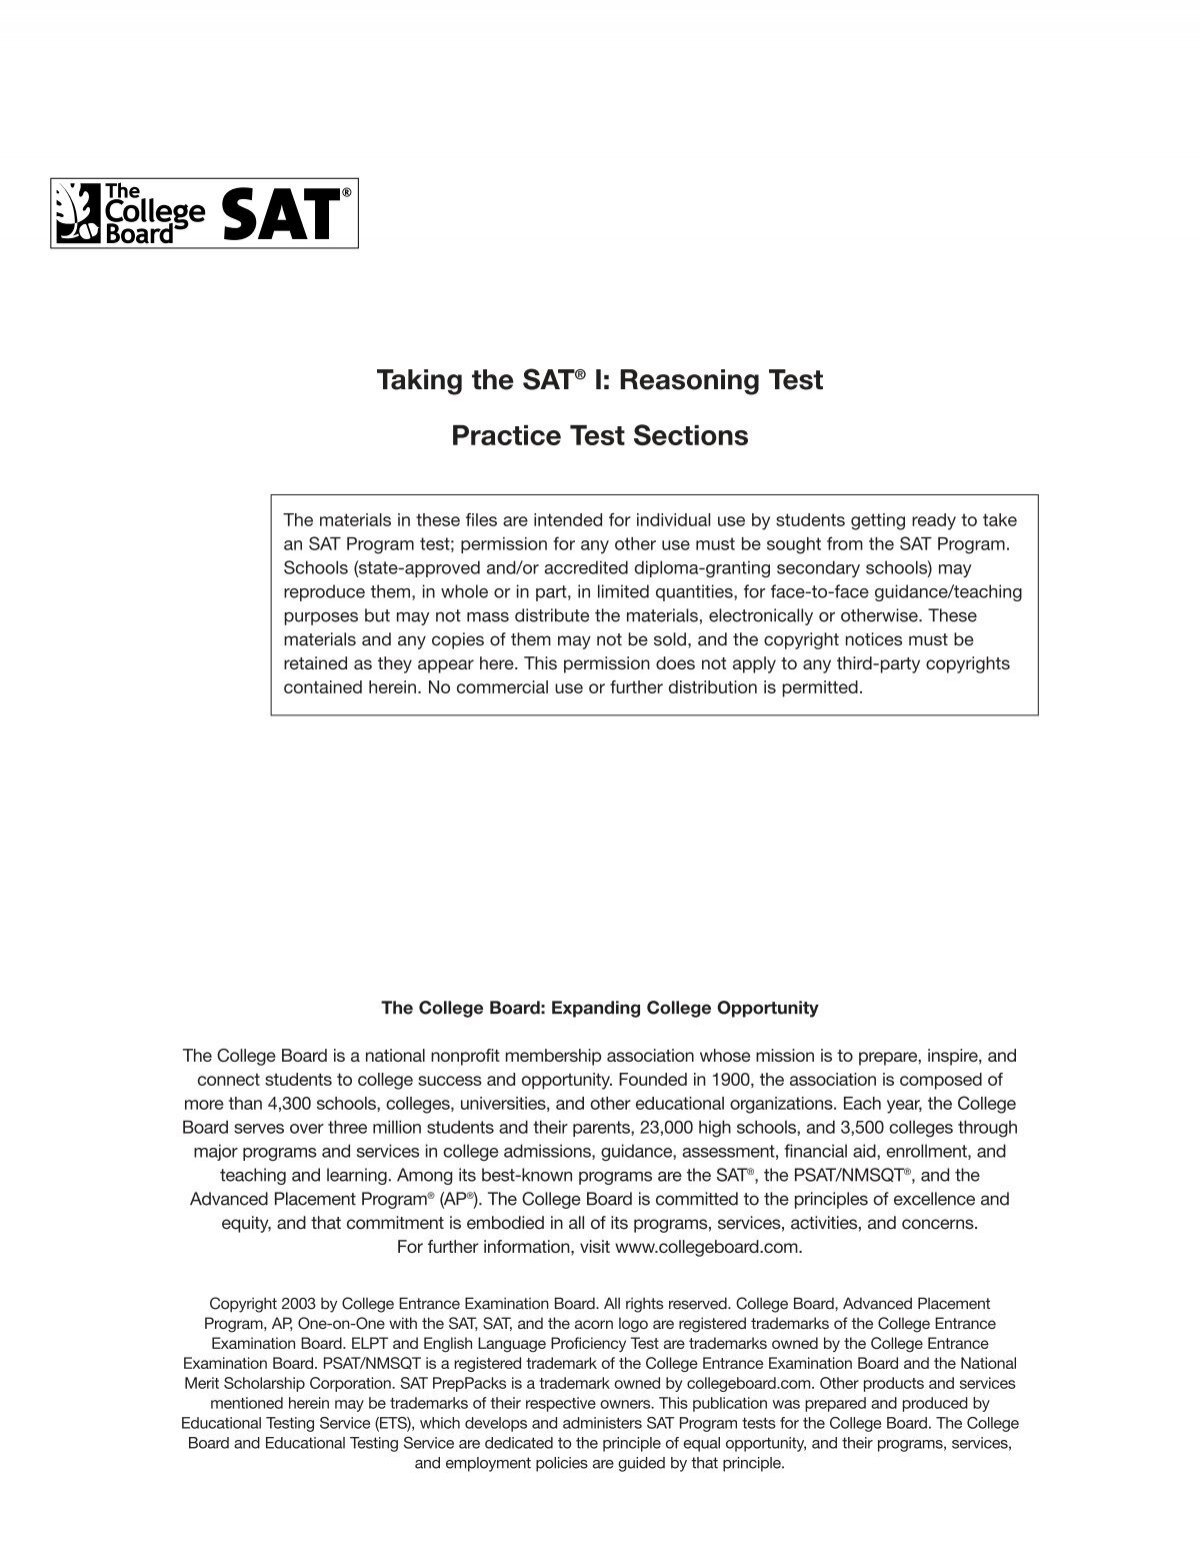 taking-the-sat-i-reasoning-test-practice-test-college-board